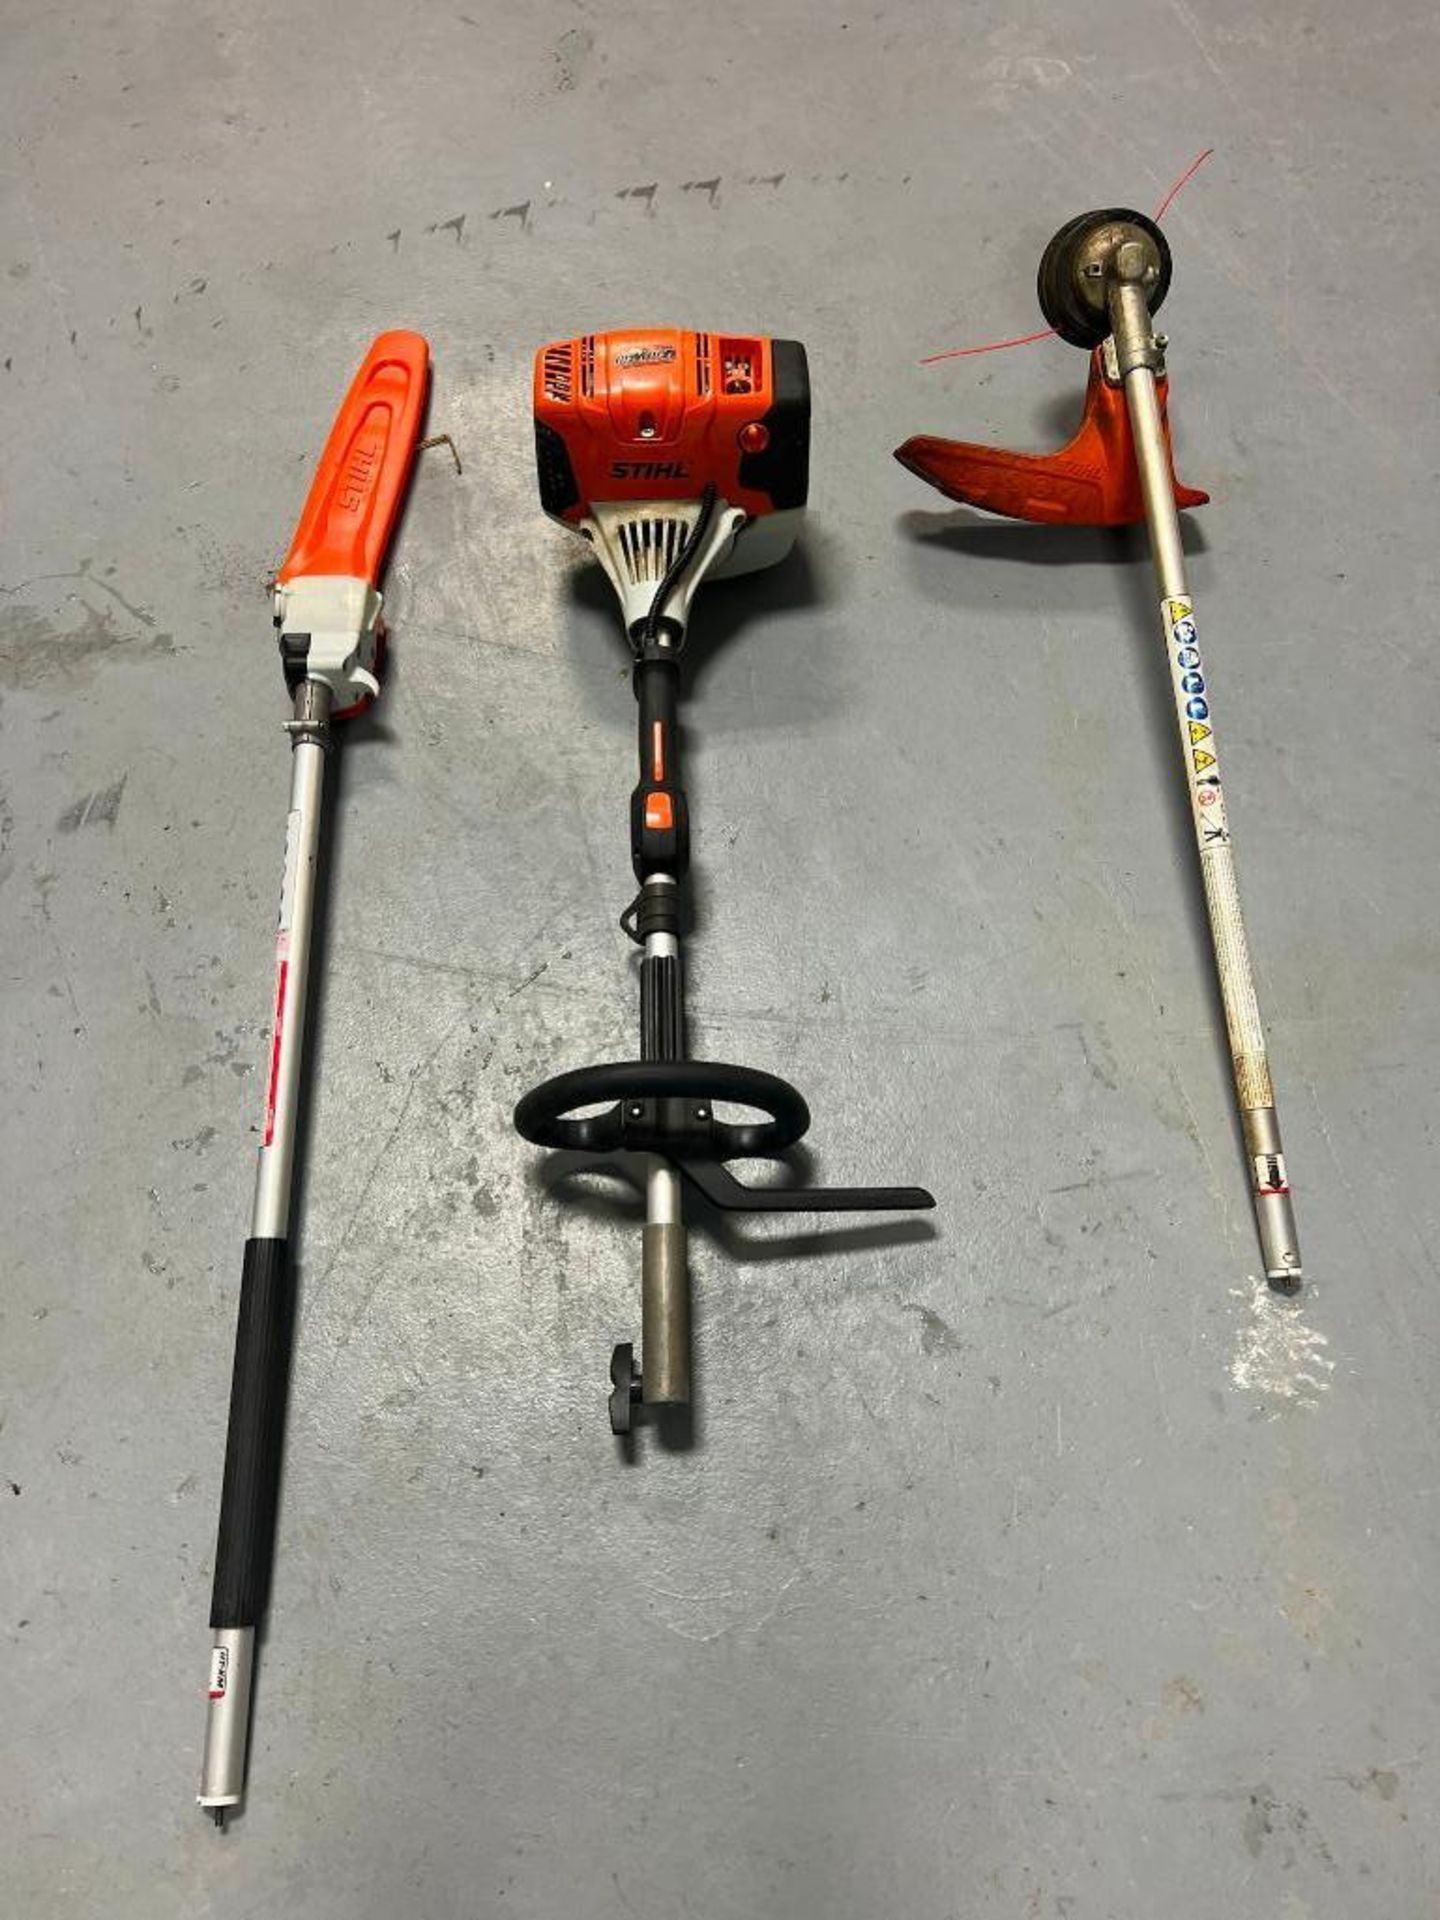 (1) Stihl KM111R with Line Head Trimmer Attachment & Long Reach Chainsaw. Located in Mt. Pleasant, I